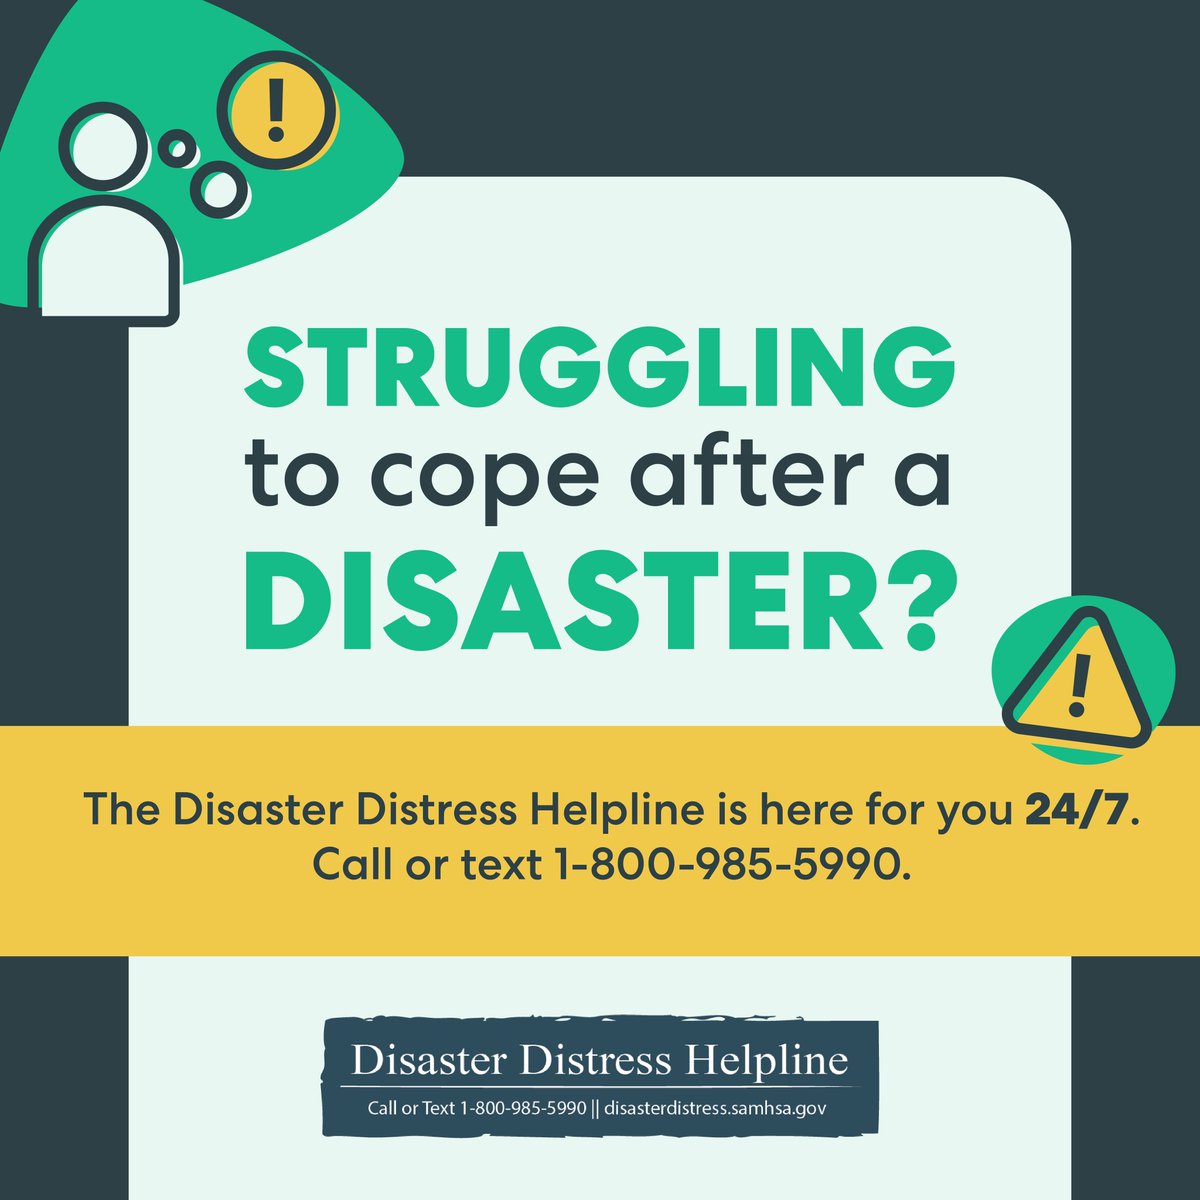 Feeling overwhelmed after a #disaster? Reach out to the national @Distressline for emotional support anytime, anywhere. Call or text 1-800-985-5990 to be connected with a trained, caring crisis counselor. #MHAM